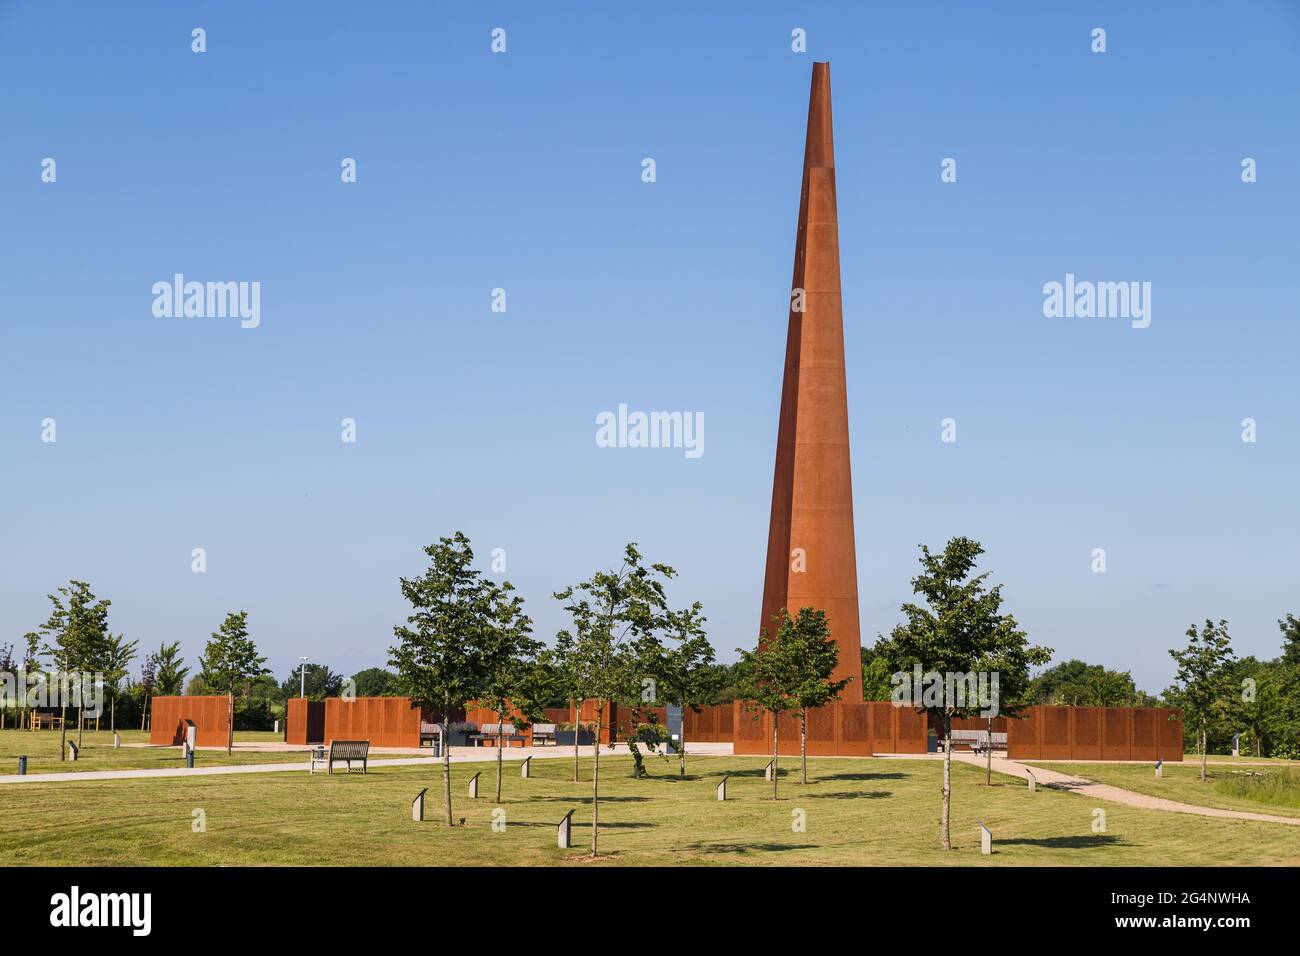 A memorial to the 57,000 men who lost their lives during WW2 defending England as part of bomber command.  Pictured at Memorial Spire at the Internati Stock Photo